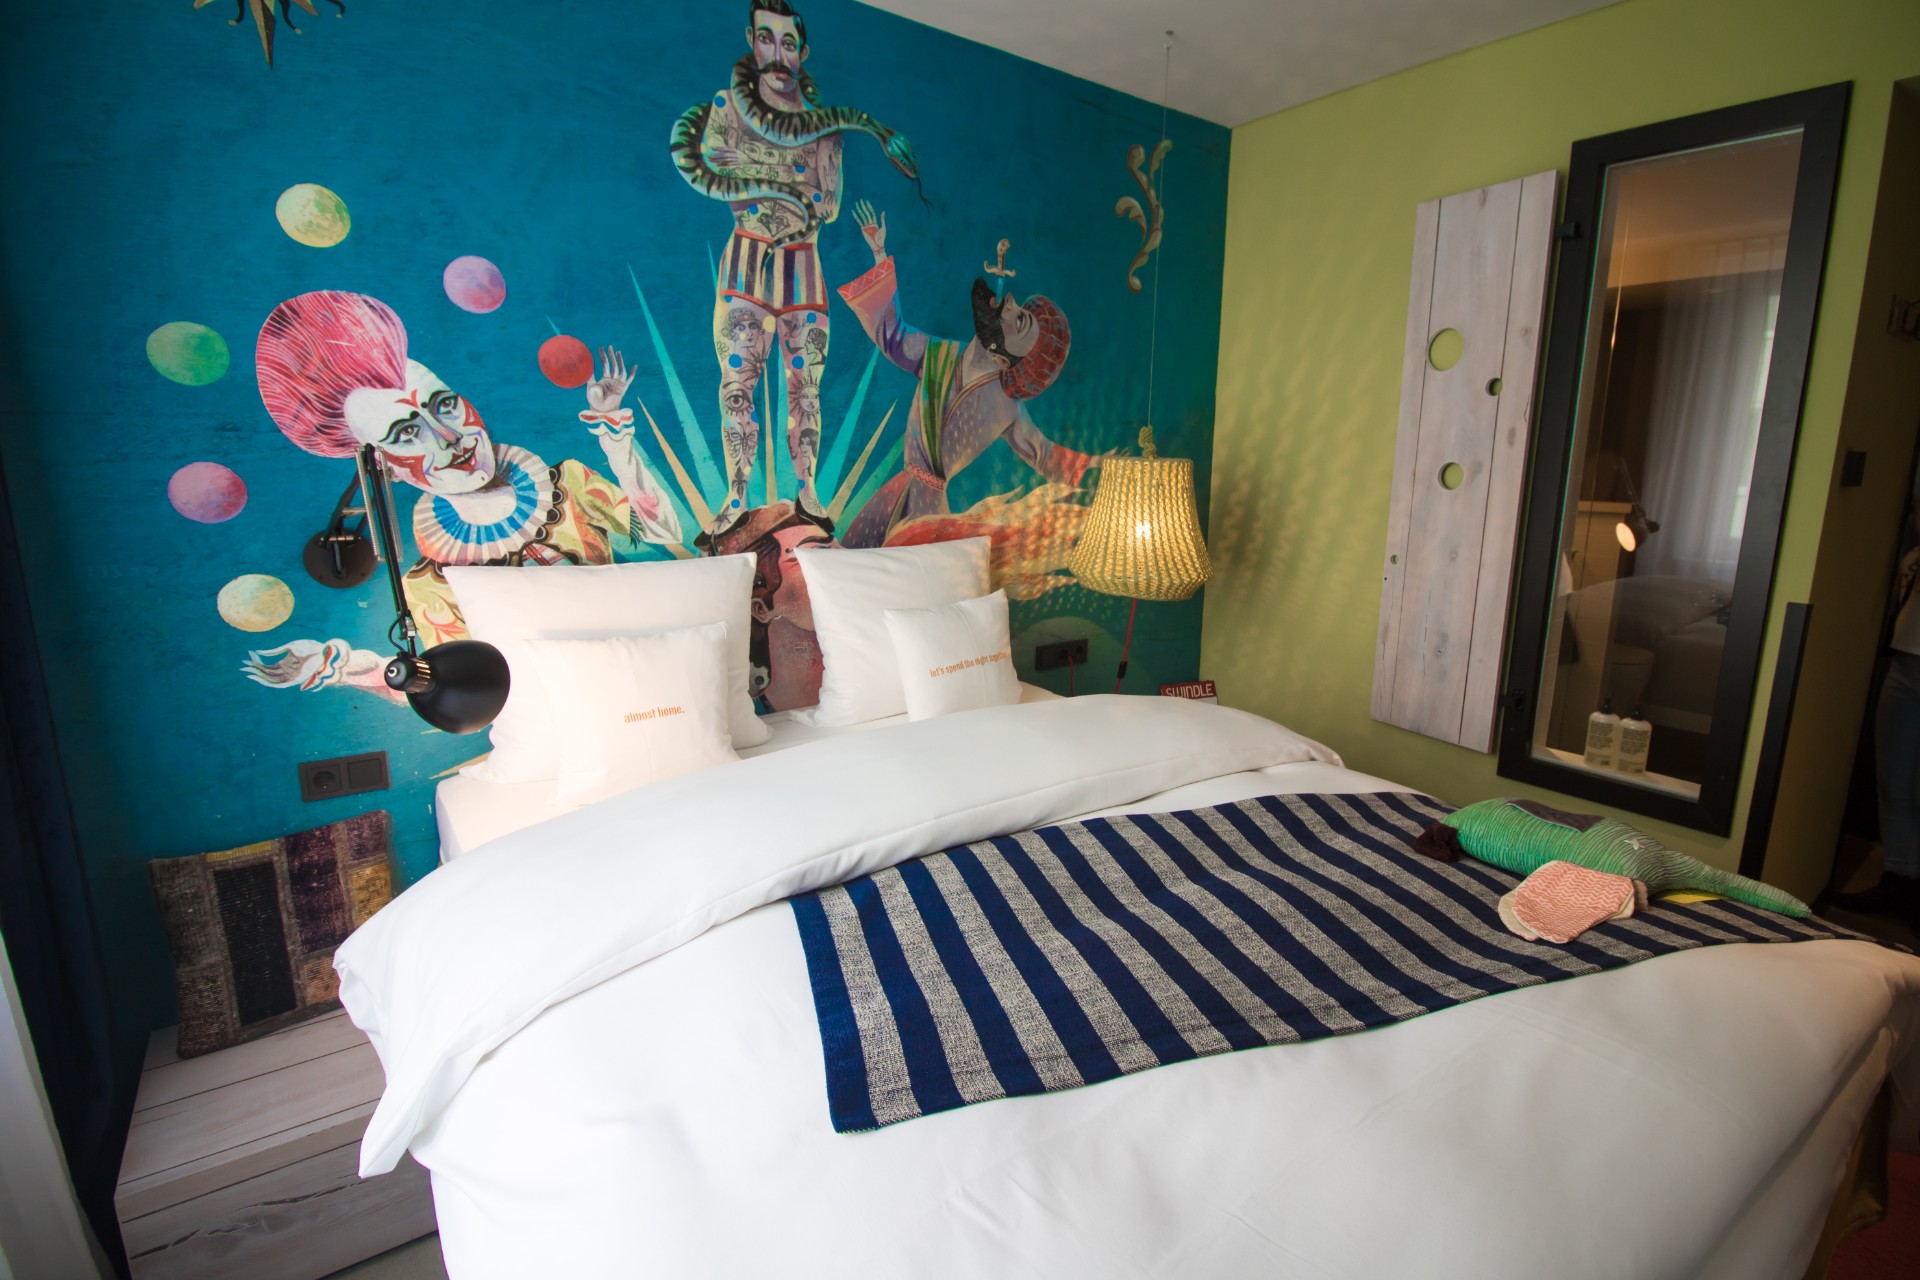 A review of my stay at 25hours Hotel Vienna at Museumsquartier, an eccentric circus-themed design hotel with a rooftop bar, restaurant, burger garden and mermaid's cave spa. This is the coolest, quirkiest, most colourful and fun hotel I have ever stayed at. A hipster or Instagrammer's dream come true! Click through to read more...